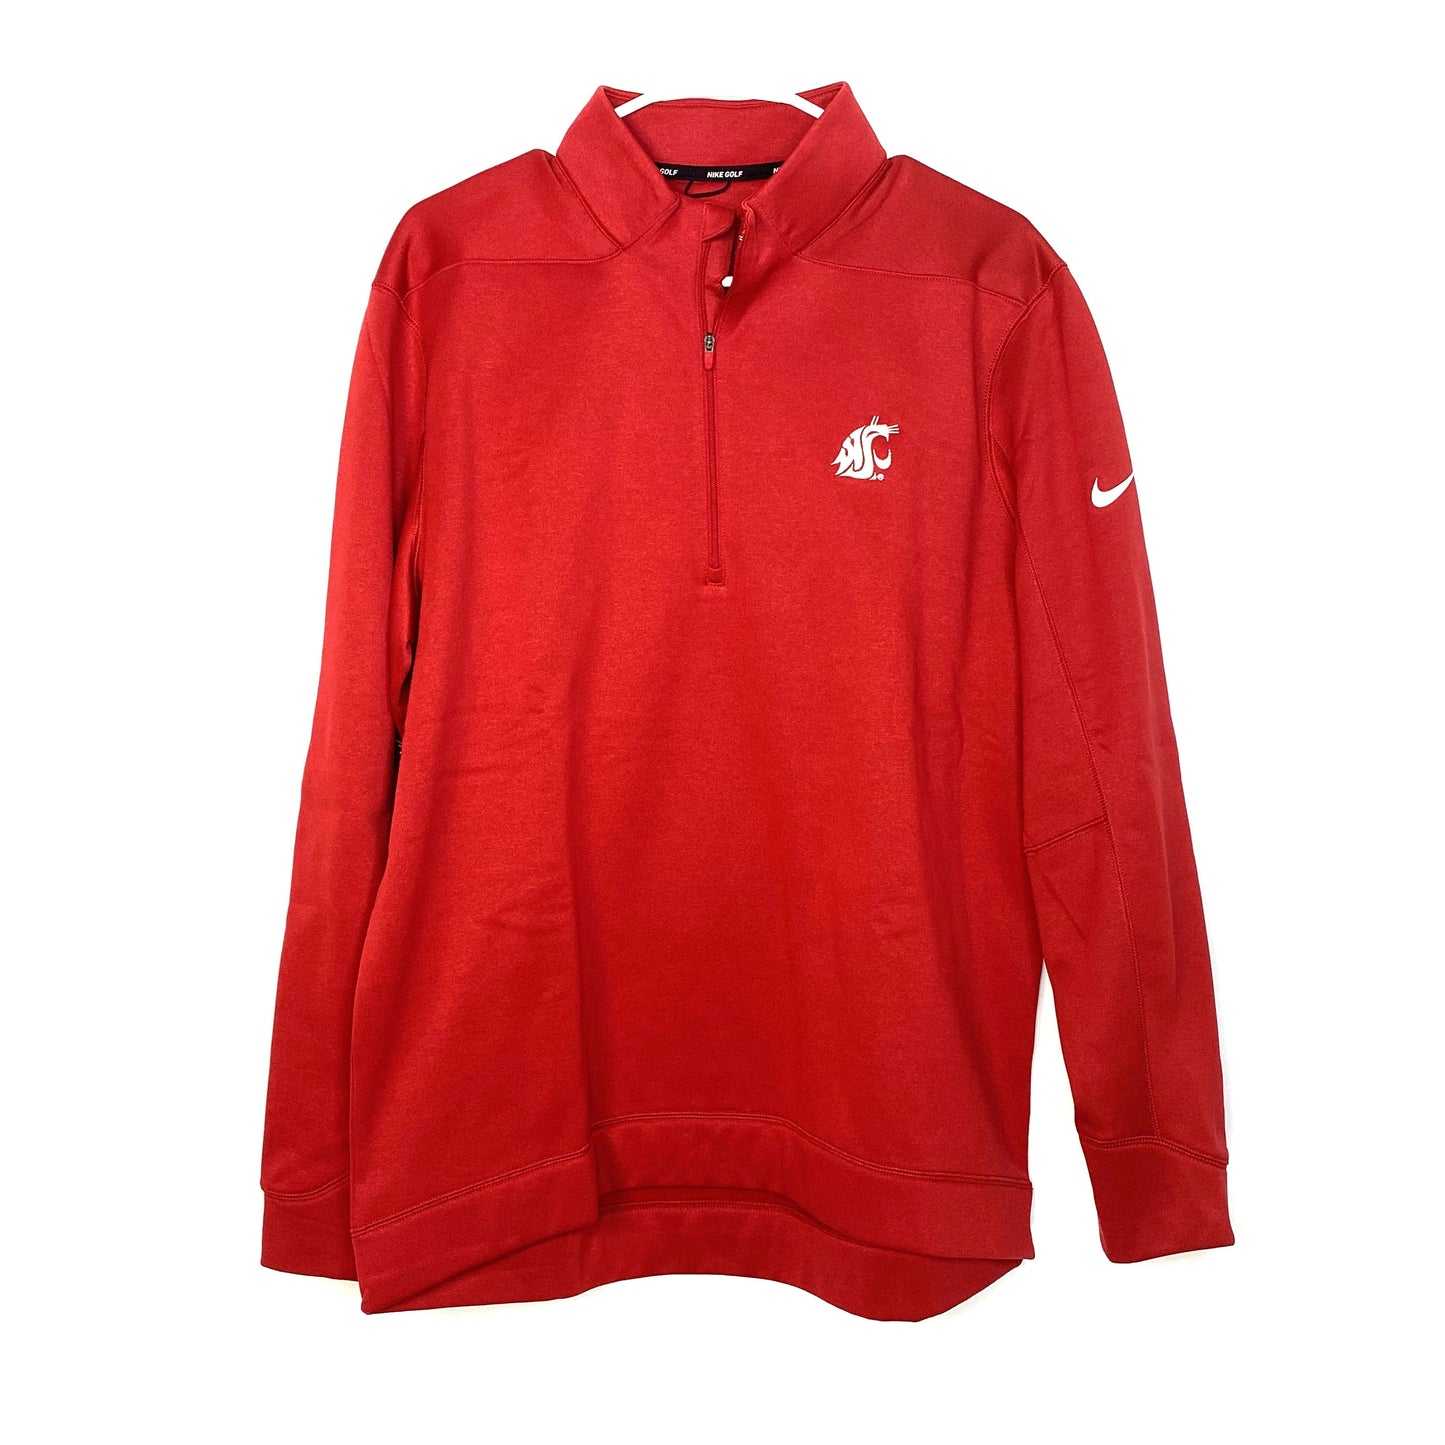 Nike Golf | Mens Washington State Cougars Pullover Sweatshirt 1/4 Zip L/s | Color: Red | Size: L | NWT